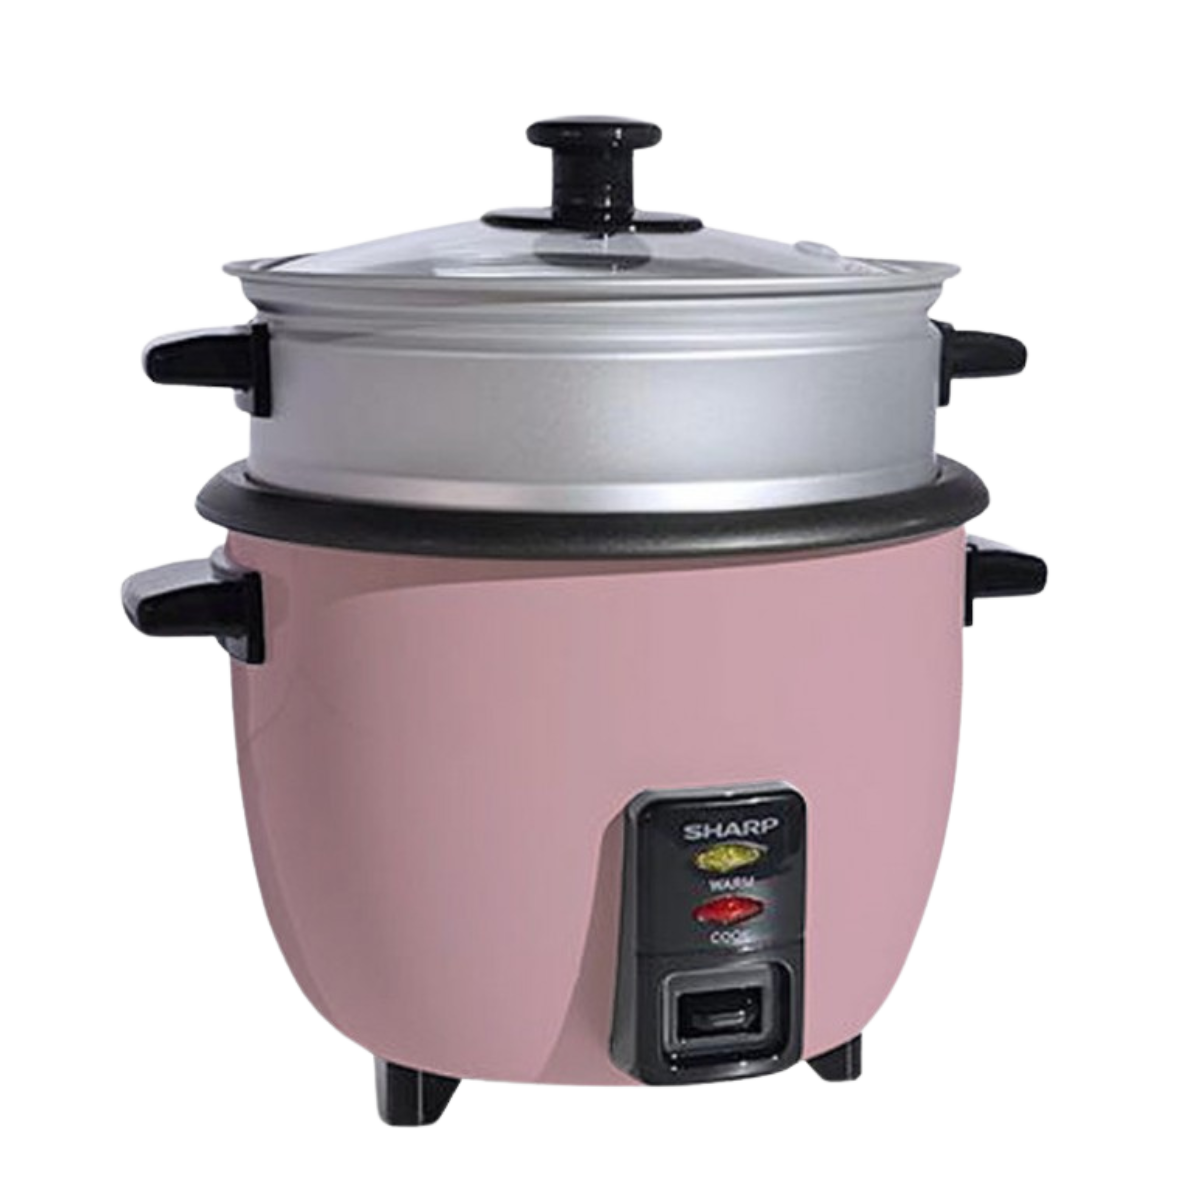 SHARP KSH188GW3 RICE COOKER 1.8L WITH STEAMER & COASTED INNER POT